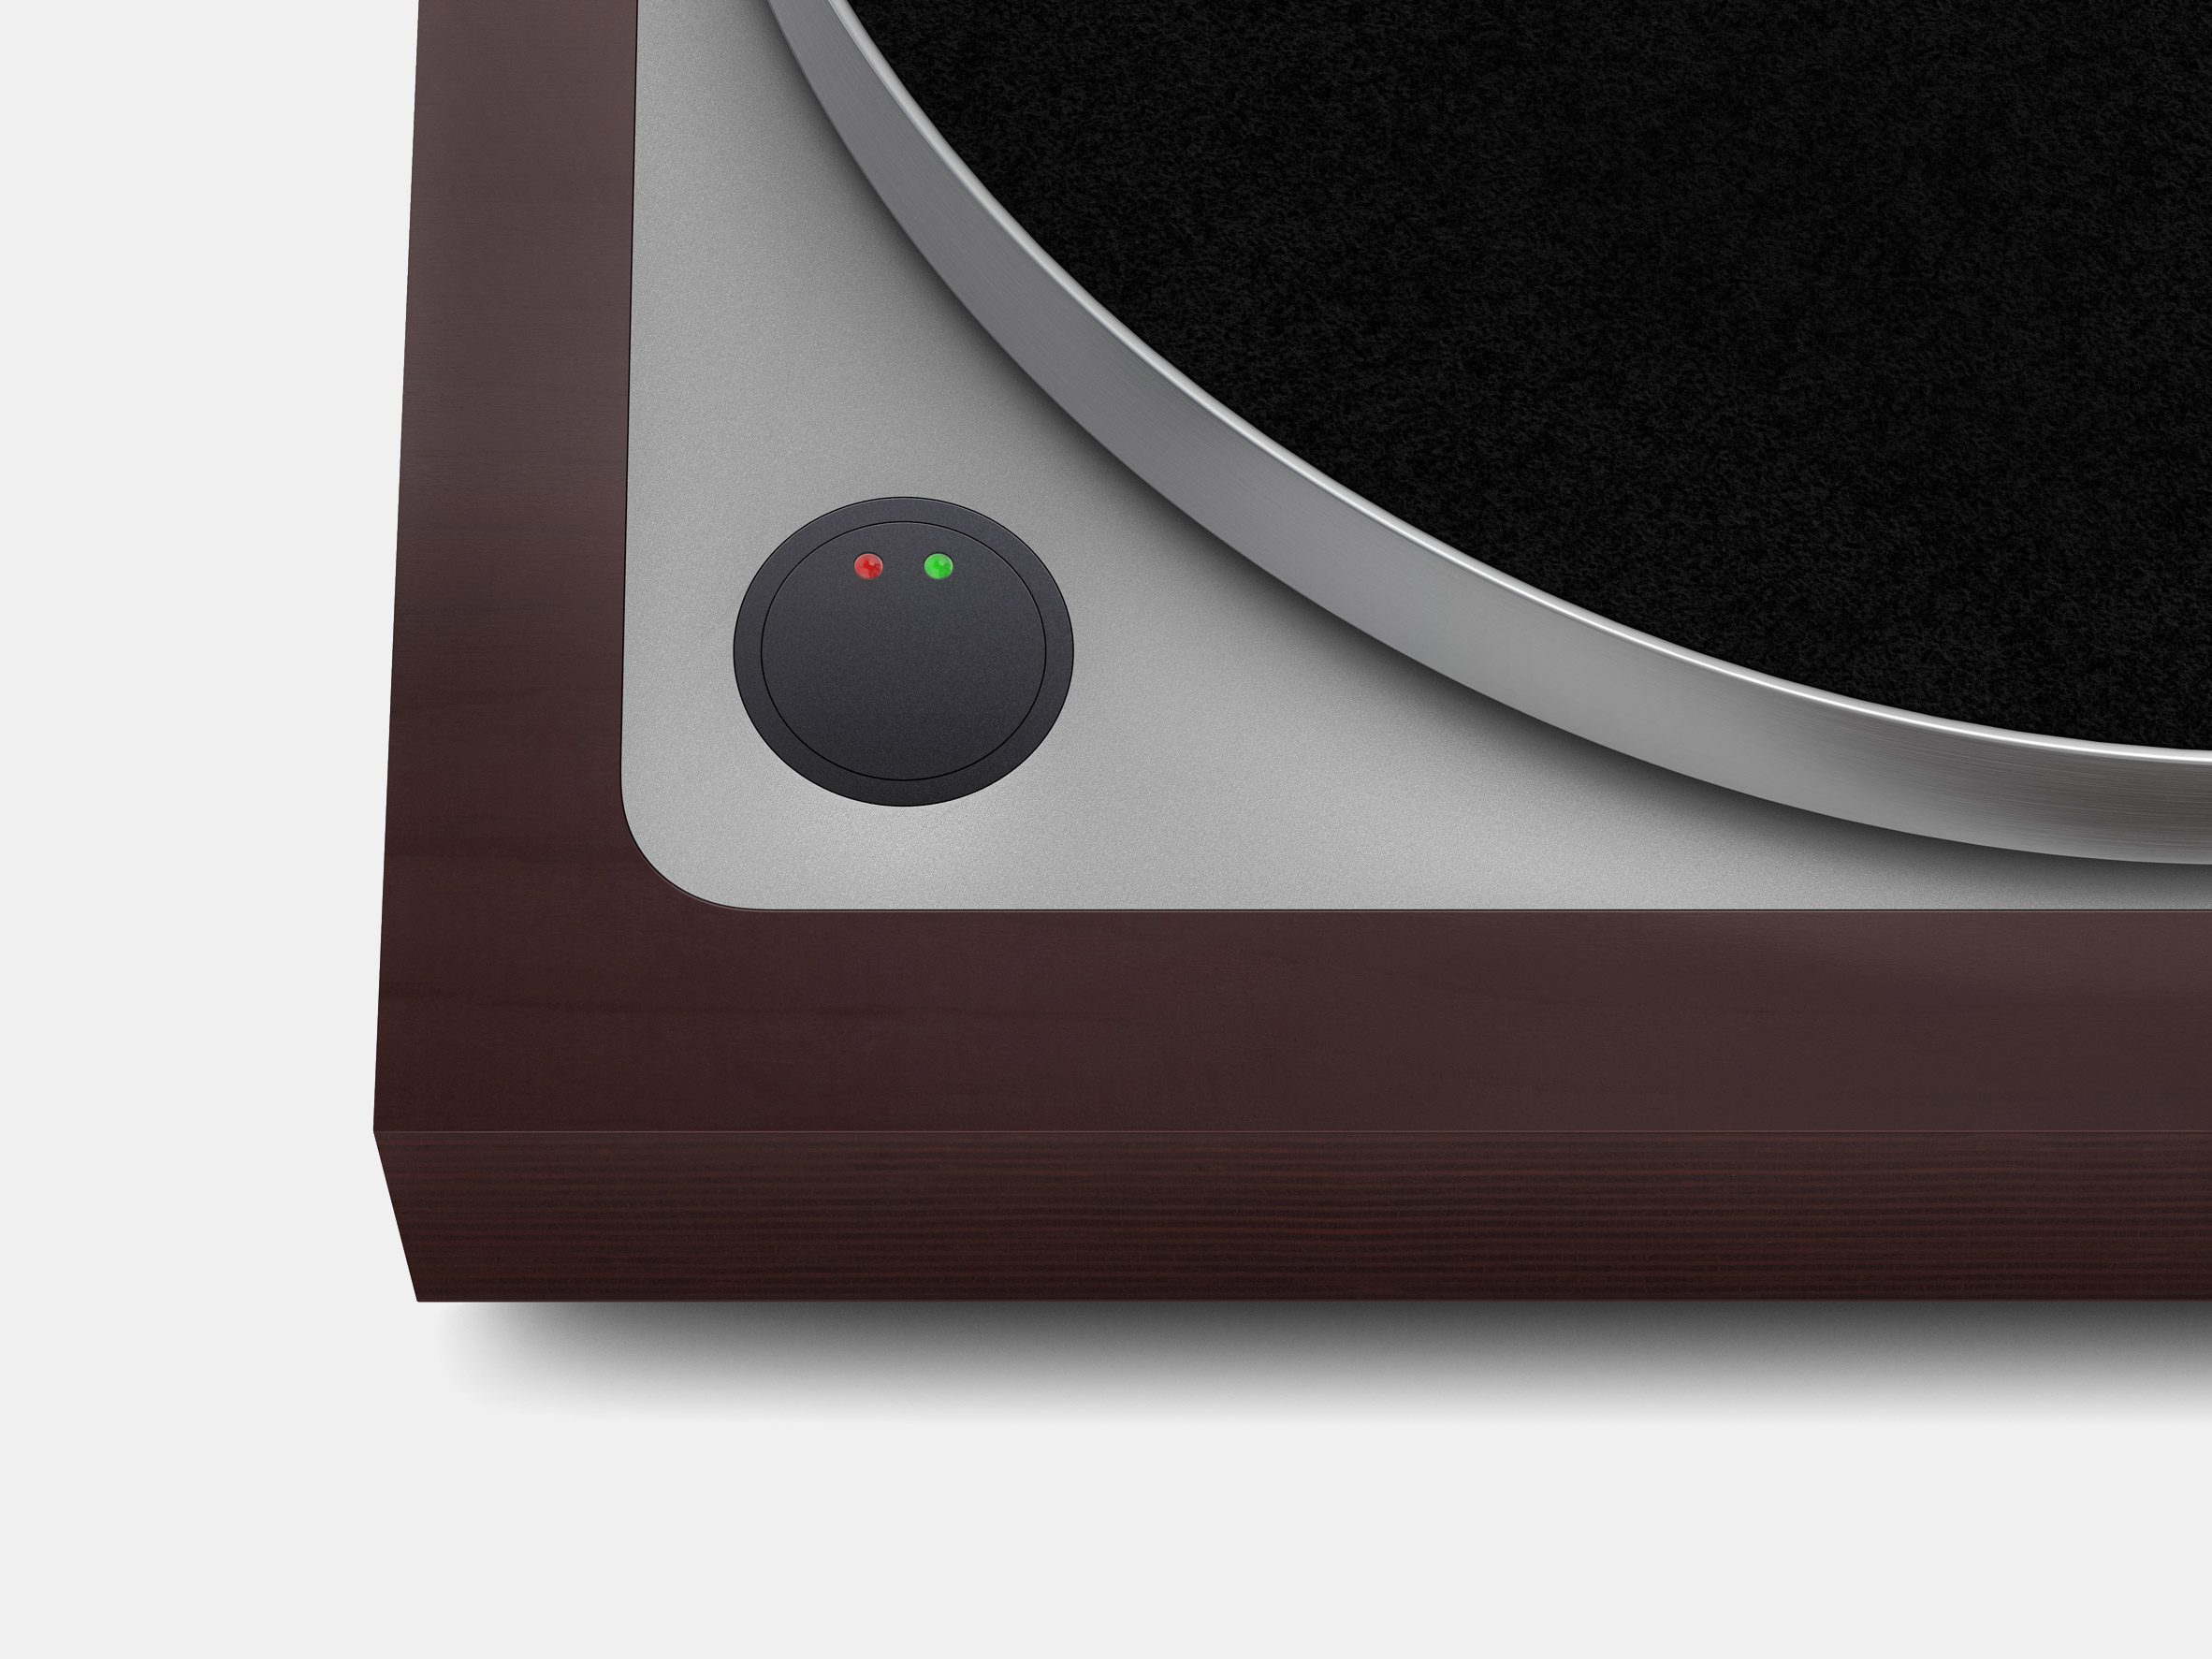 Rendering of the bottom left corner of the Linn Sondek LP12-50 showing a redesigned, circular and flat primary button with two small red and green lights